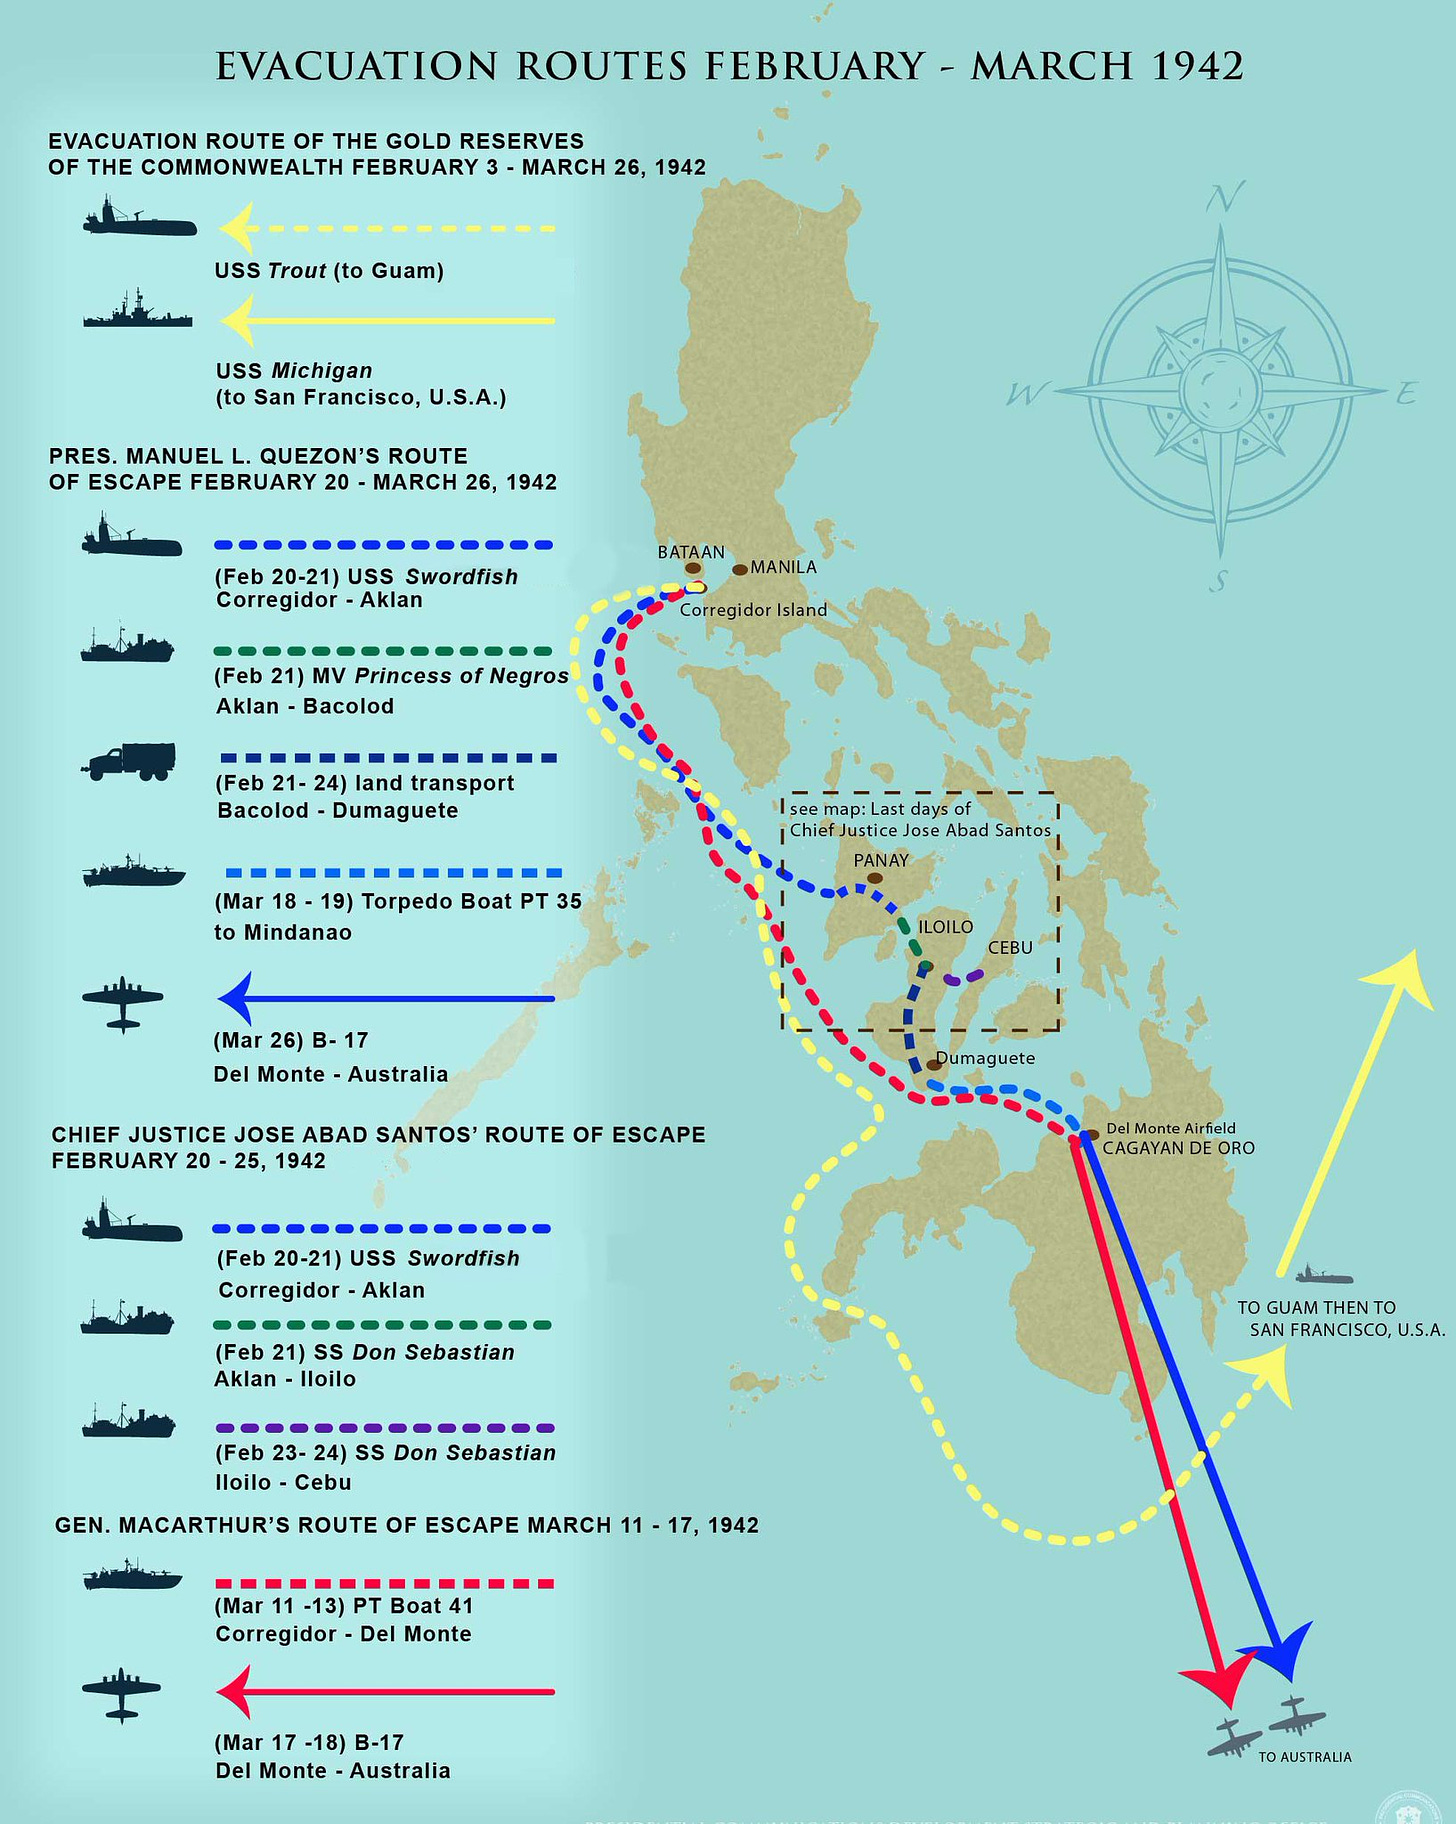 Manuel L. Quezon III on Twitter: "Evacuation routes, Feb.-March, 1942.  #WW2PH75 https://t.co/FvIledX8Yp" / Twitter